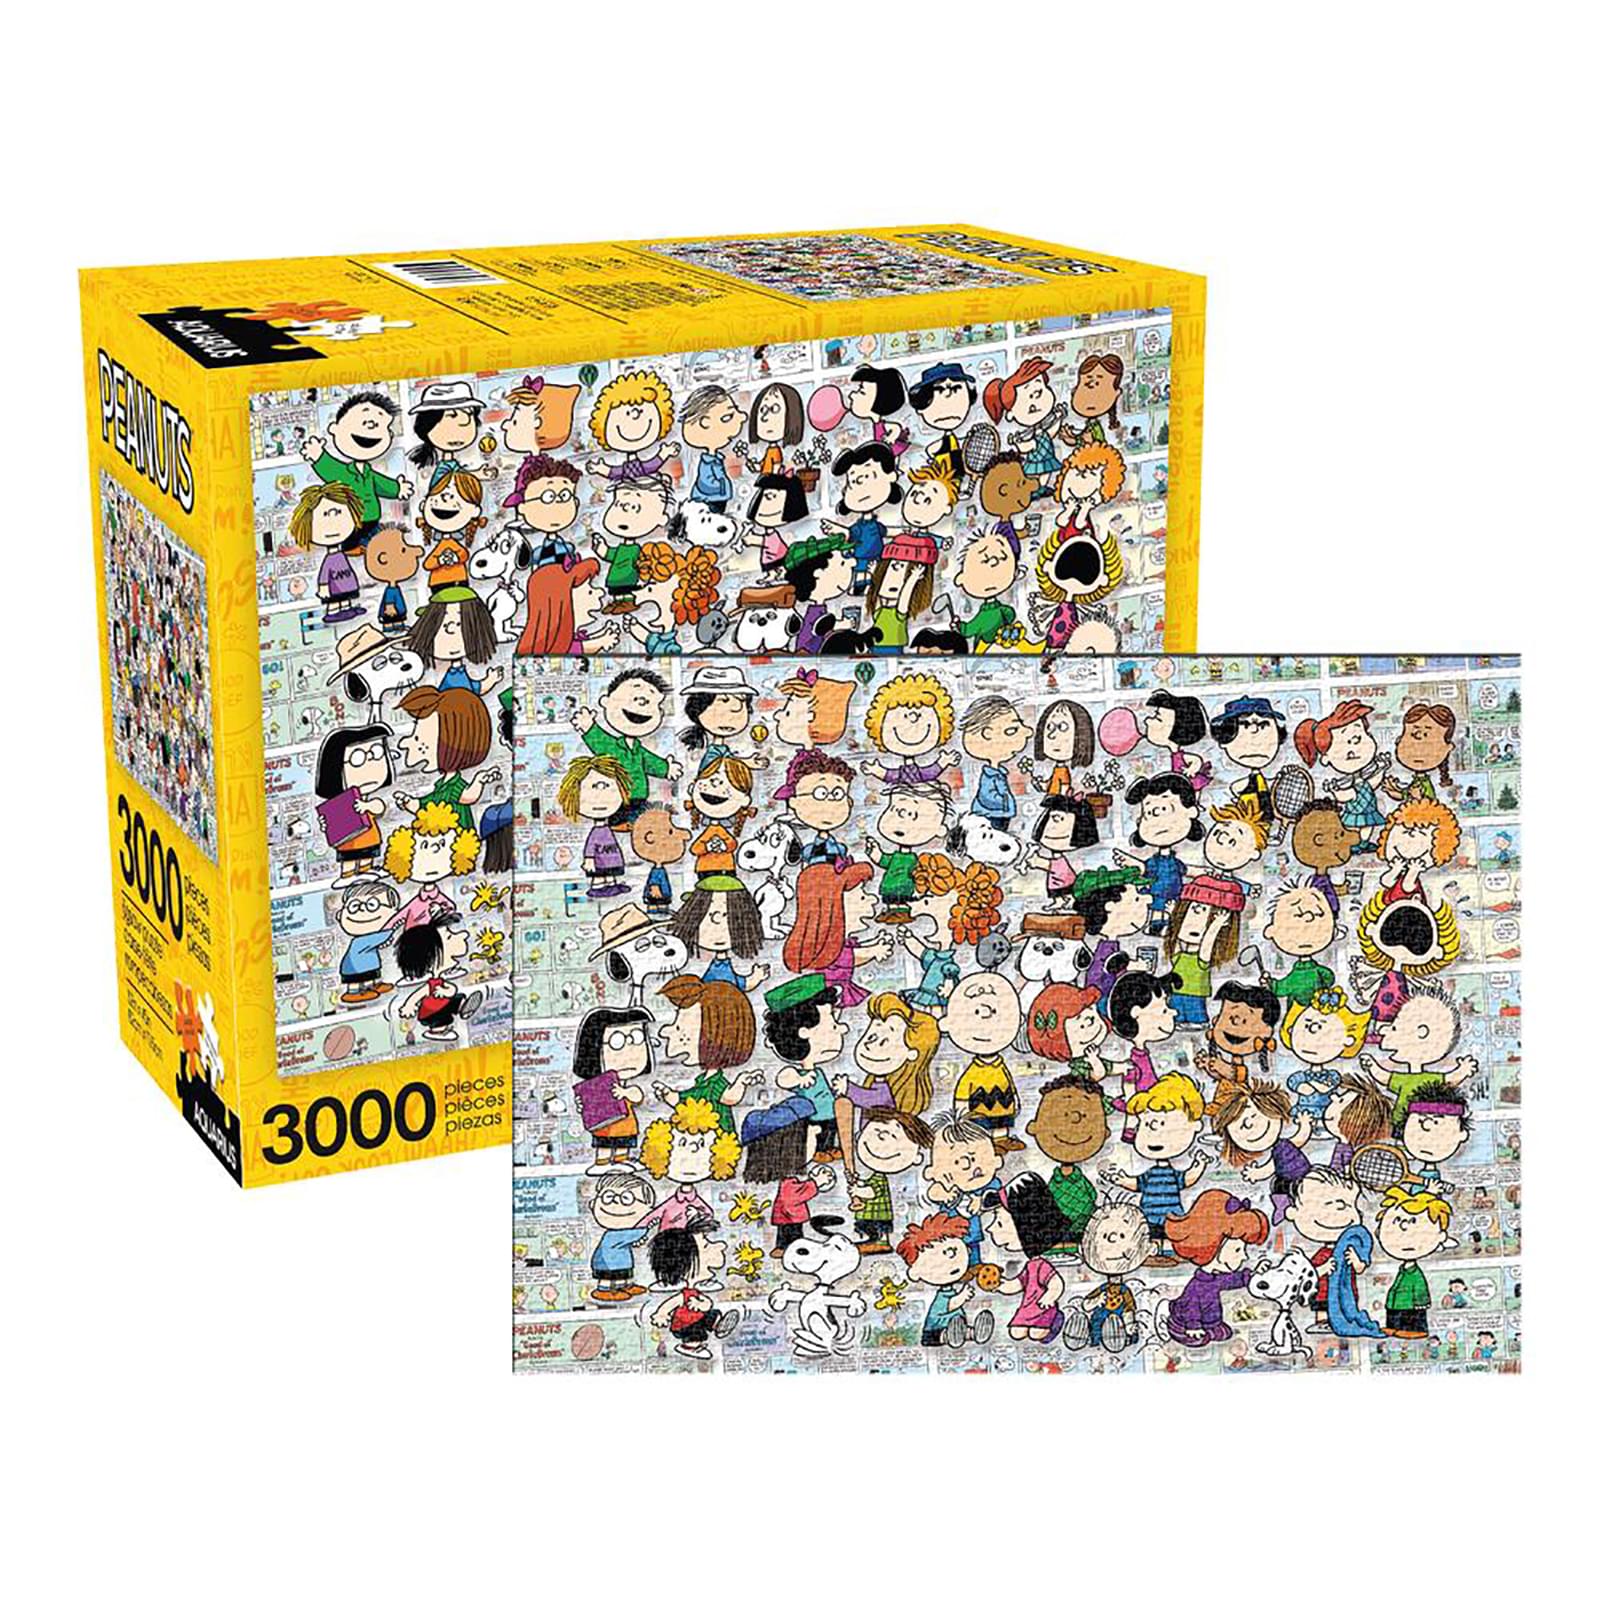 Aquarius Friends Puzzle (3000 Piece Jigsaw Puzzle) - Officially Licensed  Friends TV Show Merchandise & Collectibles - Glare Free - Precision Fit -  32